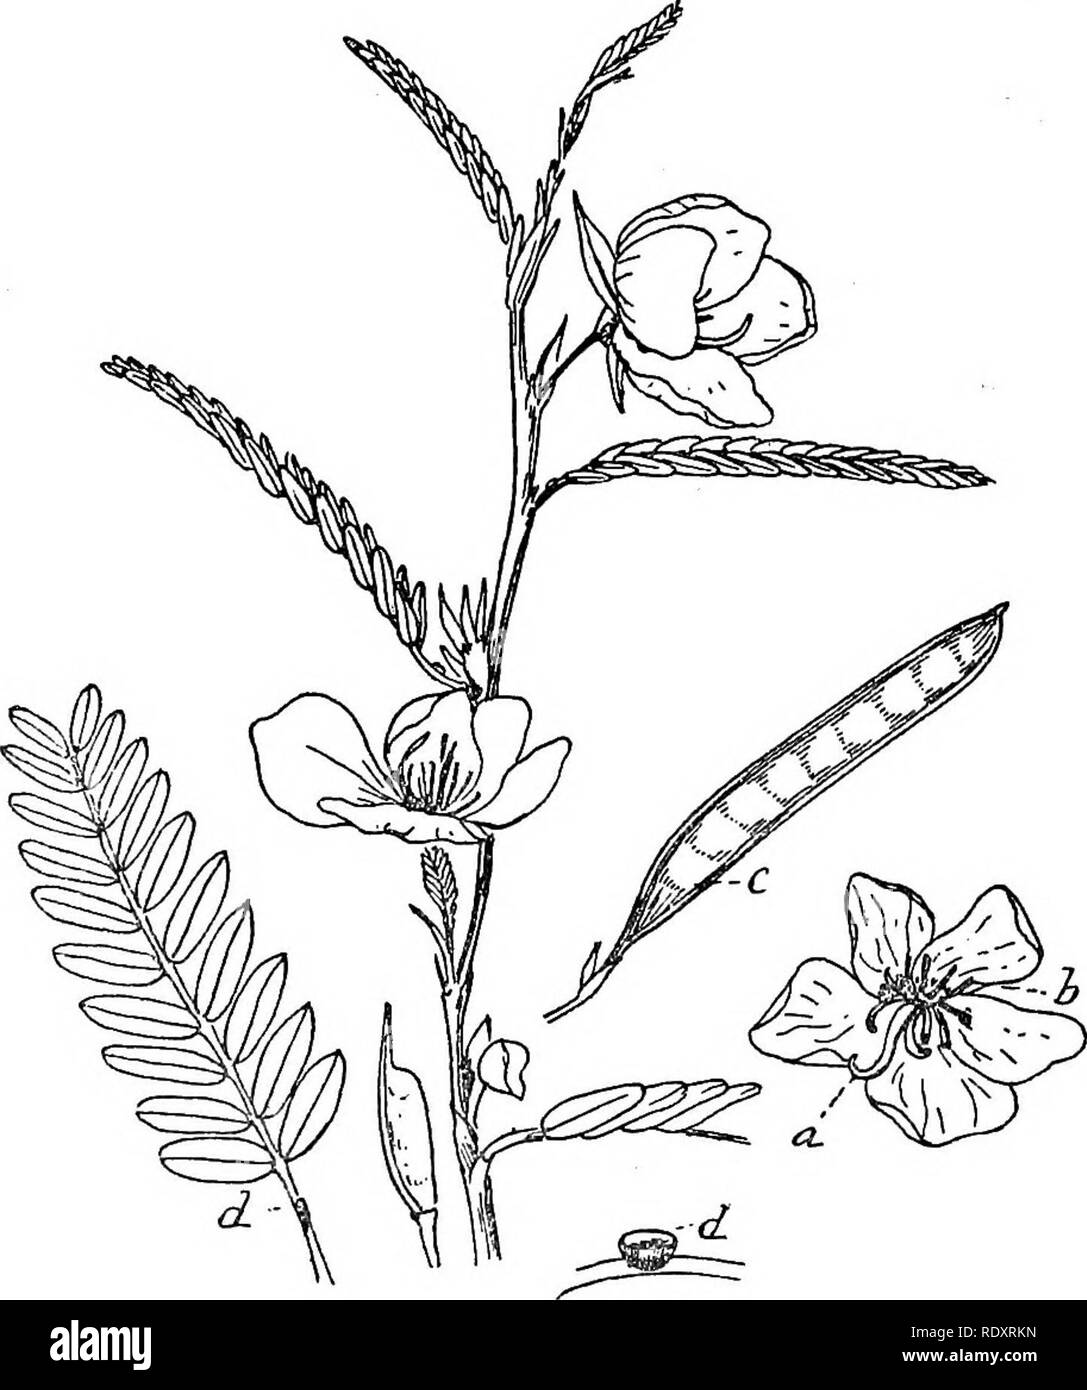 . A manual of poisonous plants, chiefly of eastern North America, with brief notes on economic and medicinal plants, and numerous illustrations. Poisonous plants. 536 MANUAL OF POISONOUS PLANTS ovules numerous. About 270 species, mostly in warm and temperate regions. A species well known in medicine is Senna (C acutifolia and C. angustifolia) with leaves which are laxative. Cassia Chamaecrista L,. Partridge Pea An annual, spreading, 1 foot long; leaves with a sessile gland on the petiole; leaflets of 10-15 pairs; flowers large, showy; petals yellow, with a purple spot at the base; anthers 10,  Stock Photo